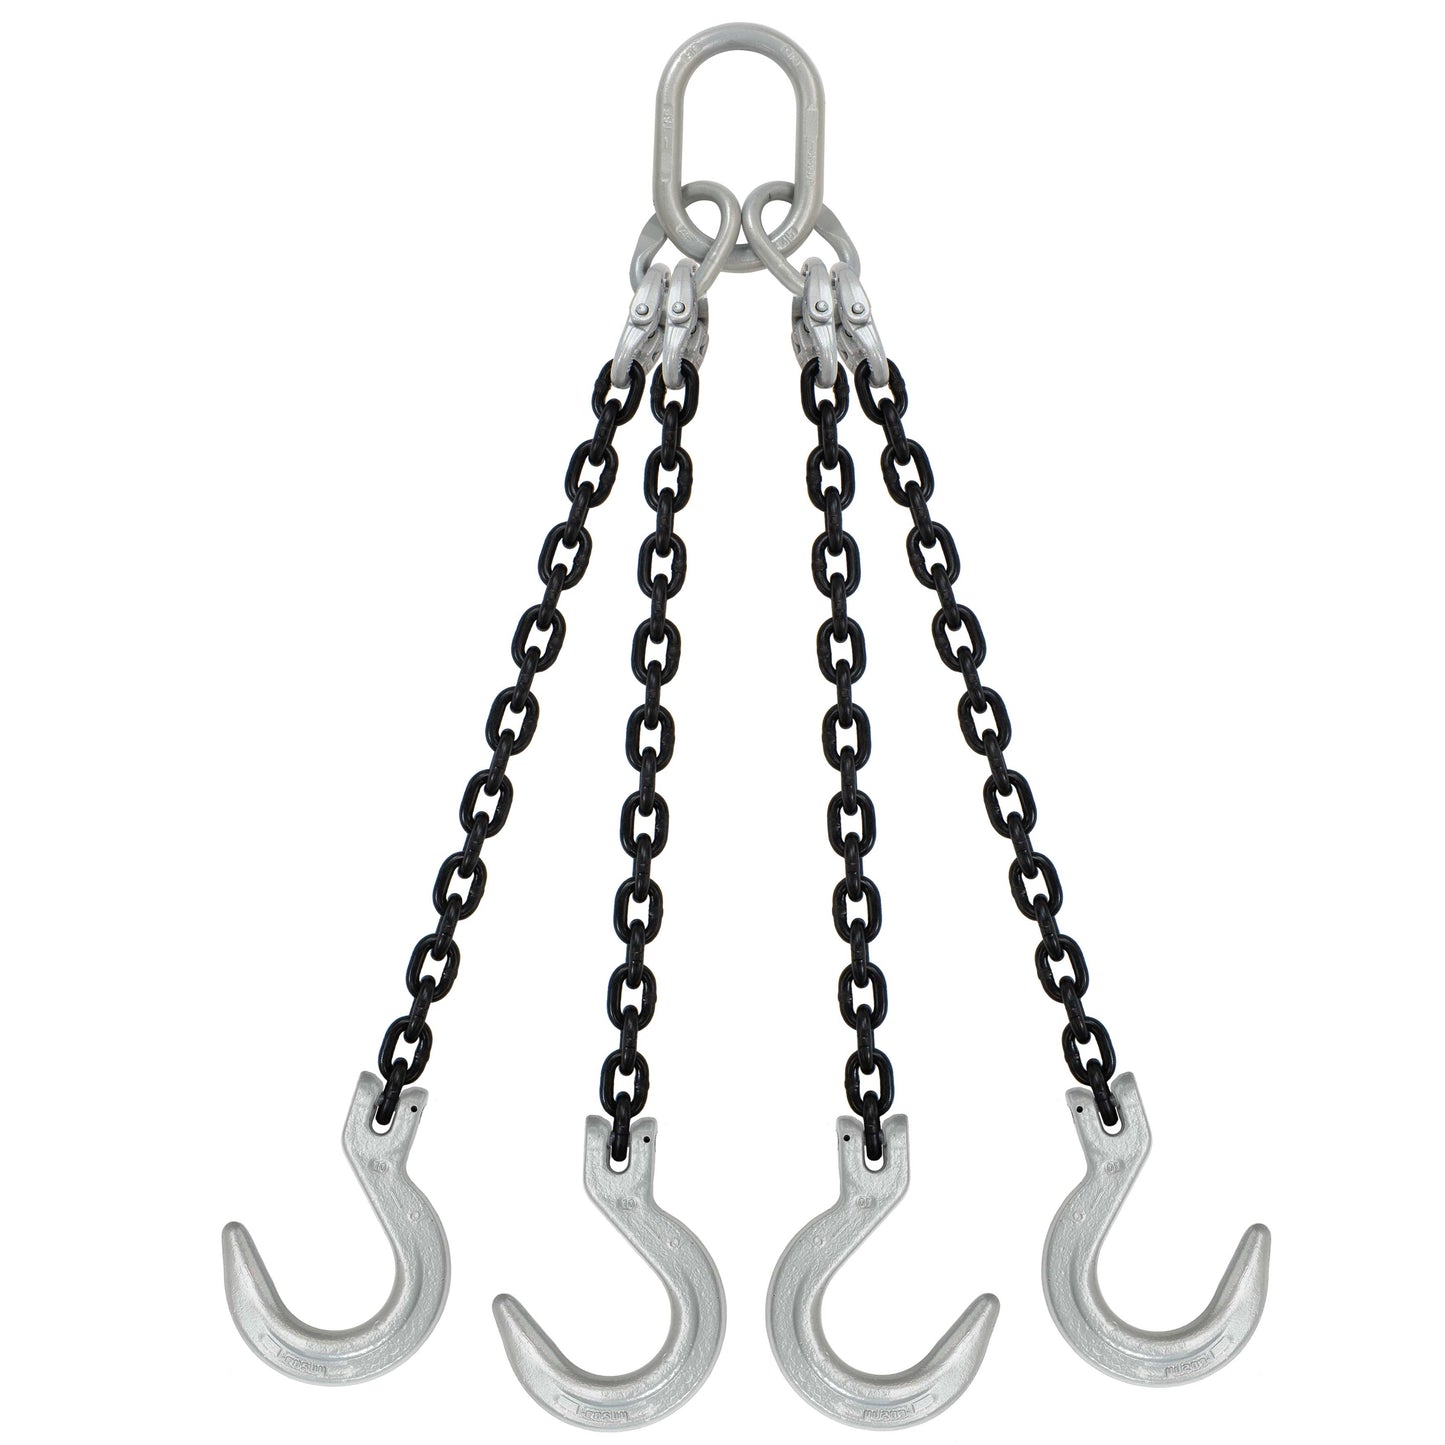 12 inch x 14 foot Domestic 4 Leg Chain Sling w Crosby Foundry Hooks Grade 100 image 1 of 2